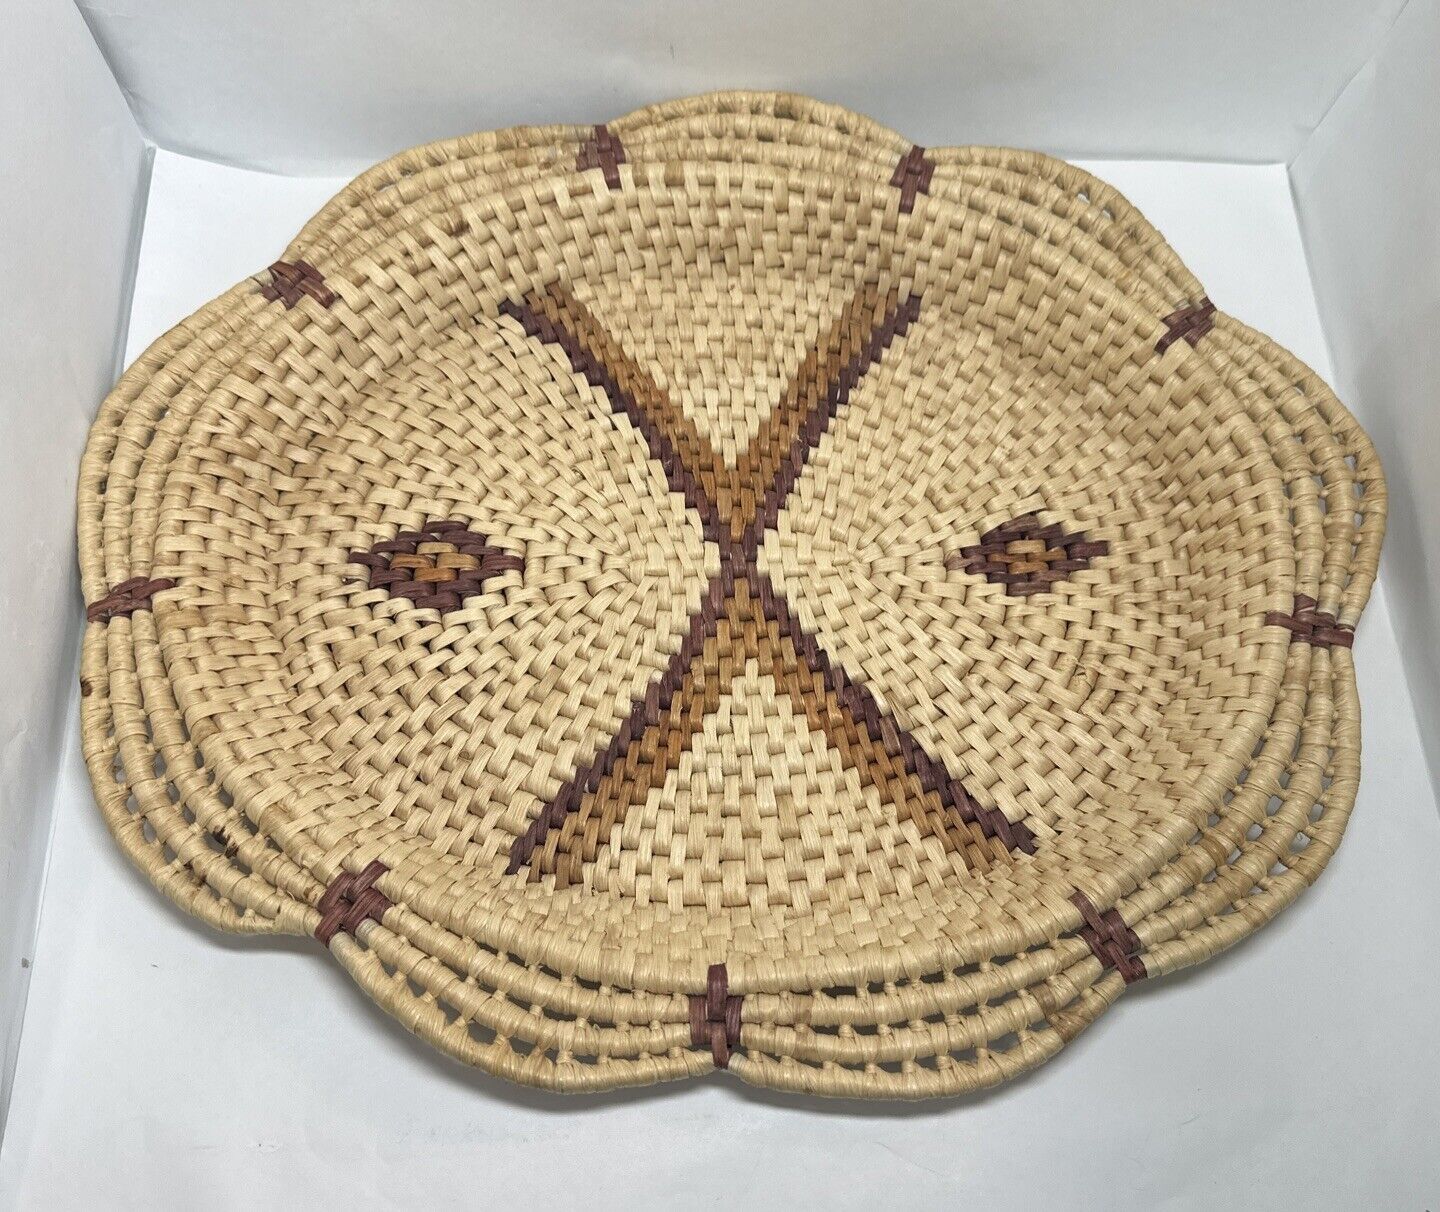 Seagrass Basket, Woven Oval Scalloped Tray, Wall Decor Vintage 1970’s Handmade